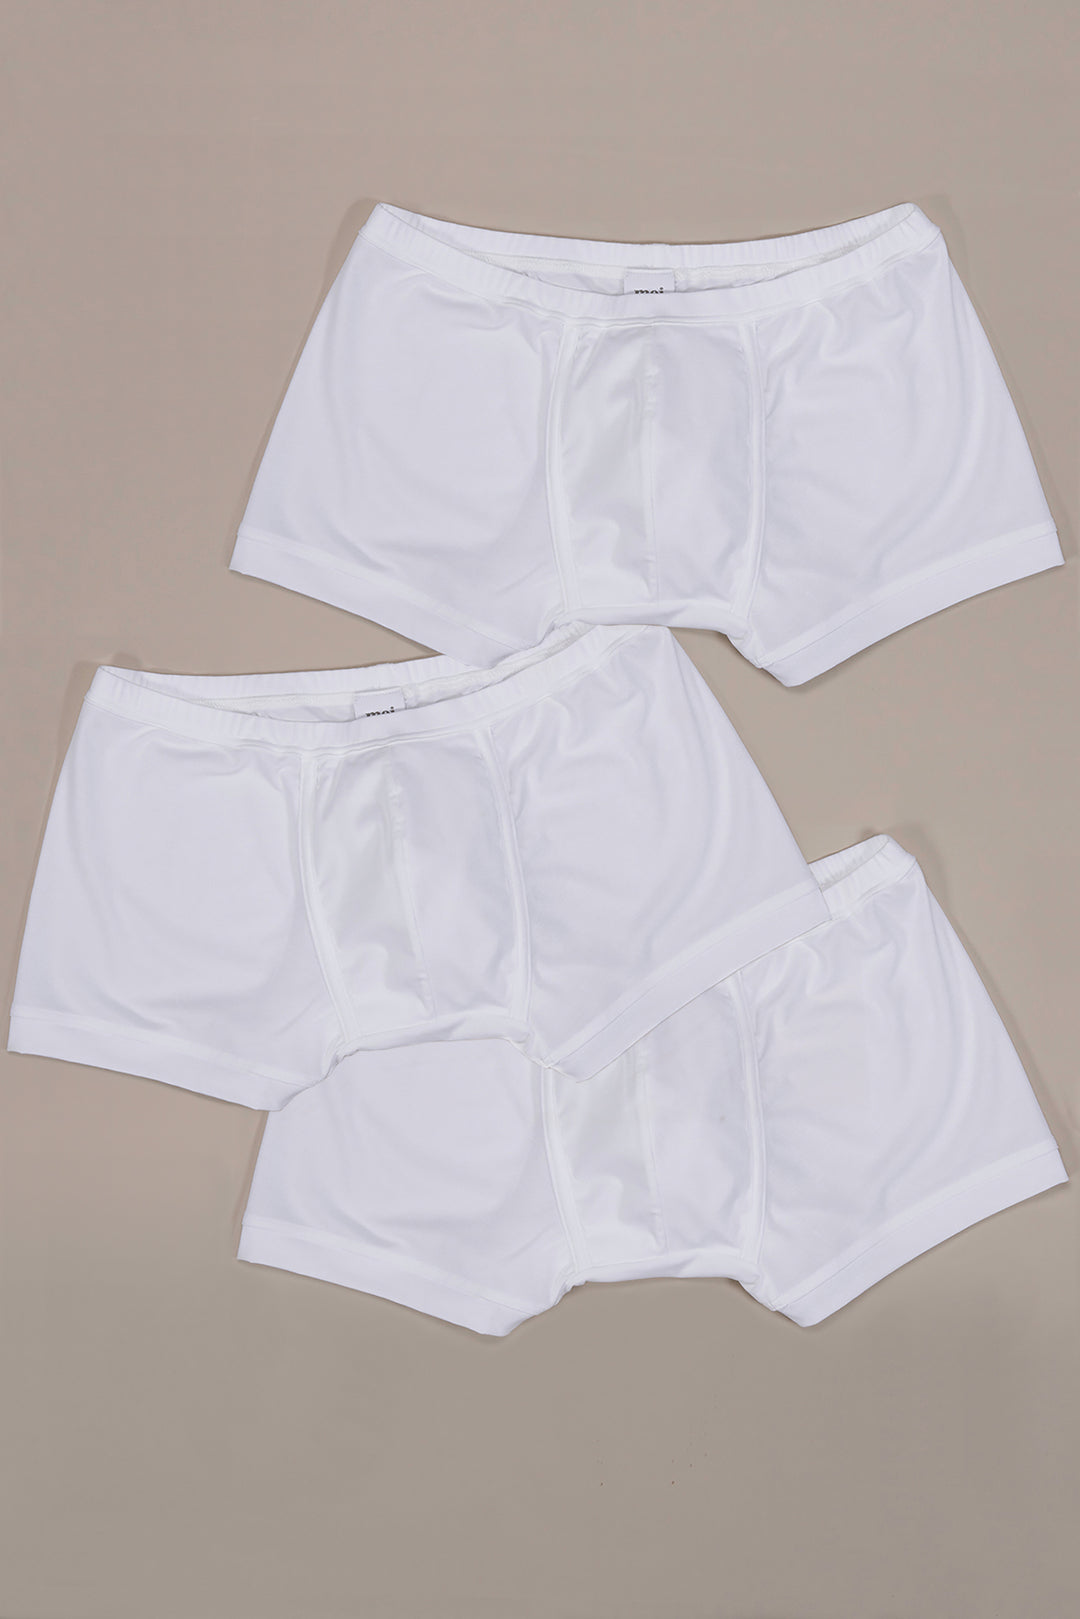 3-Pack Men'S White Polyester Quick-Dry Flyless Boxer Briefs